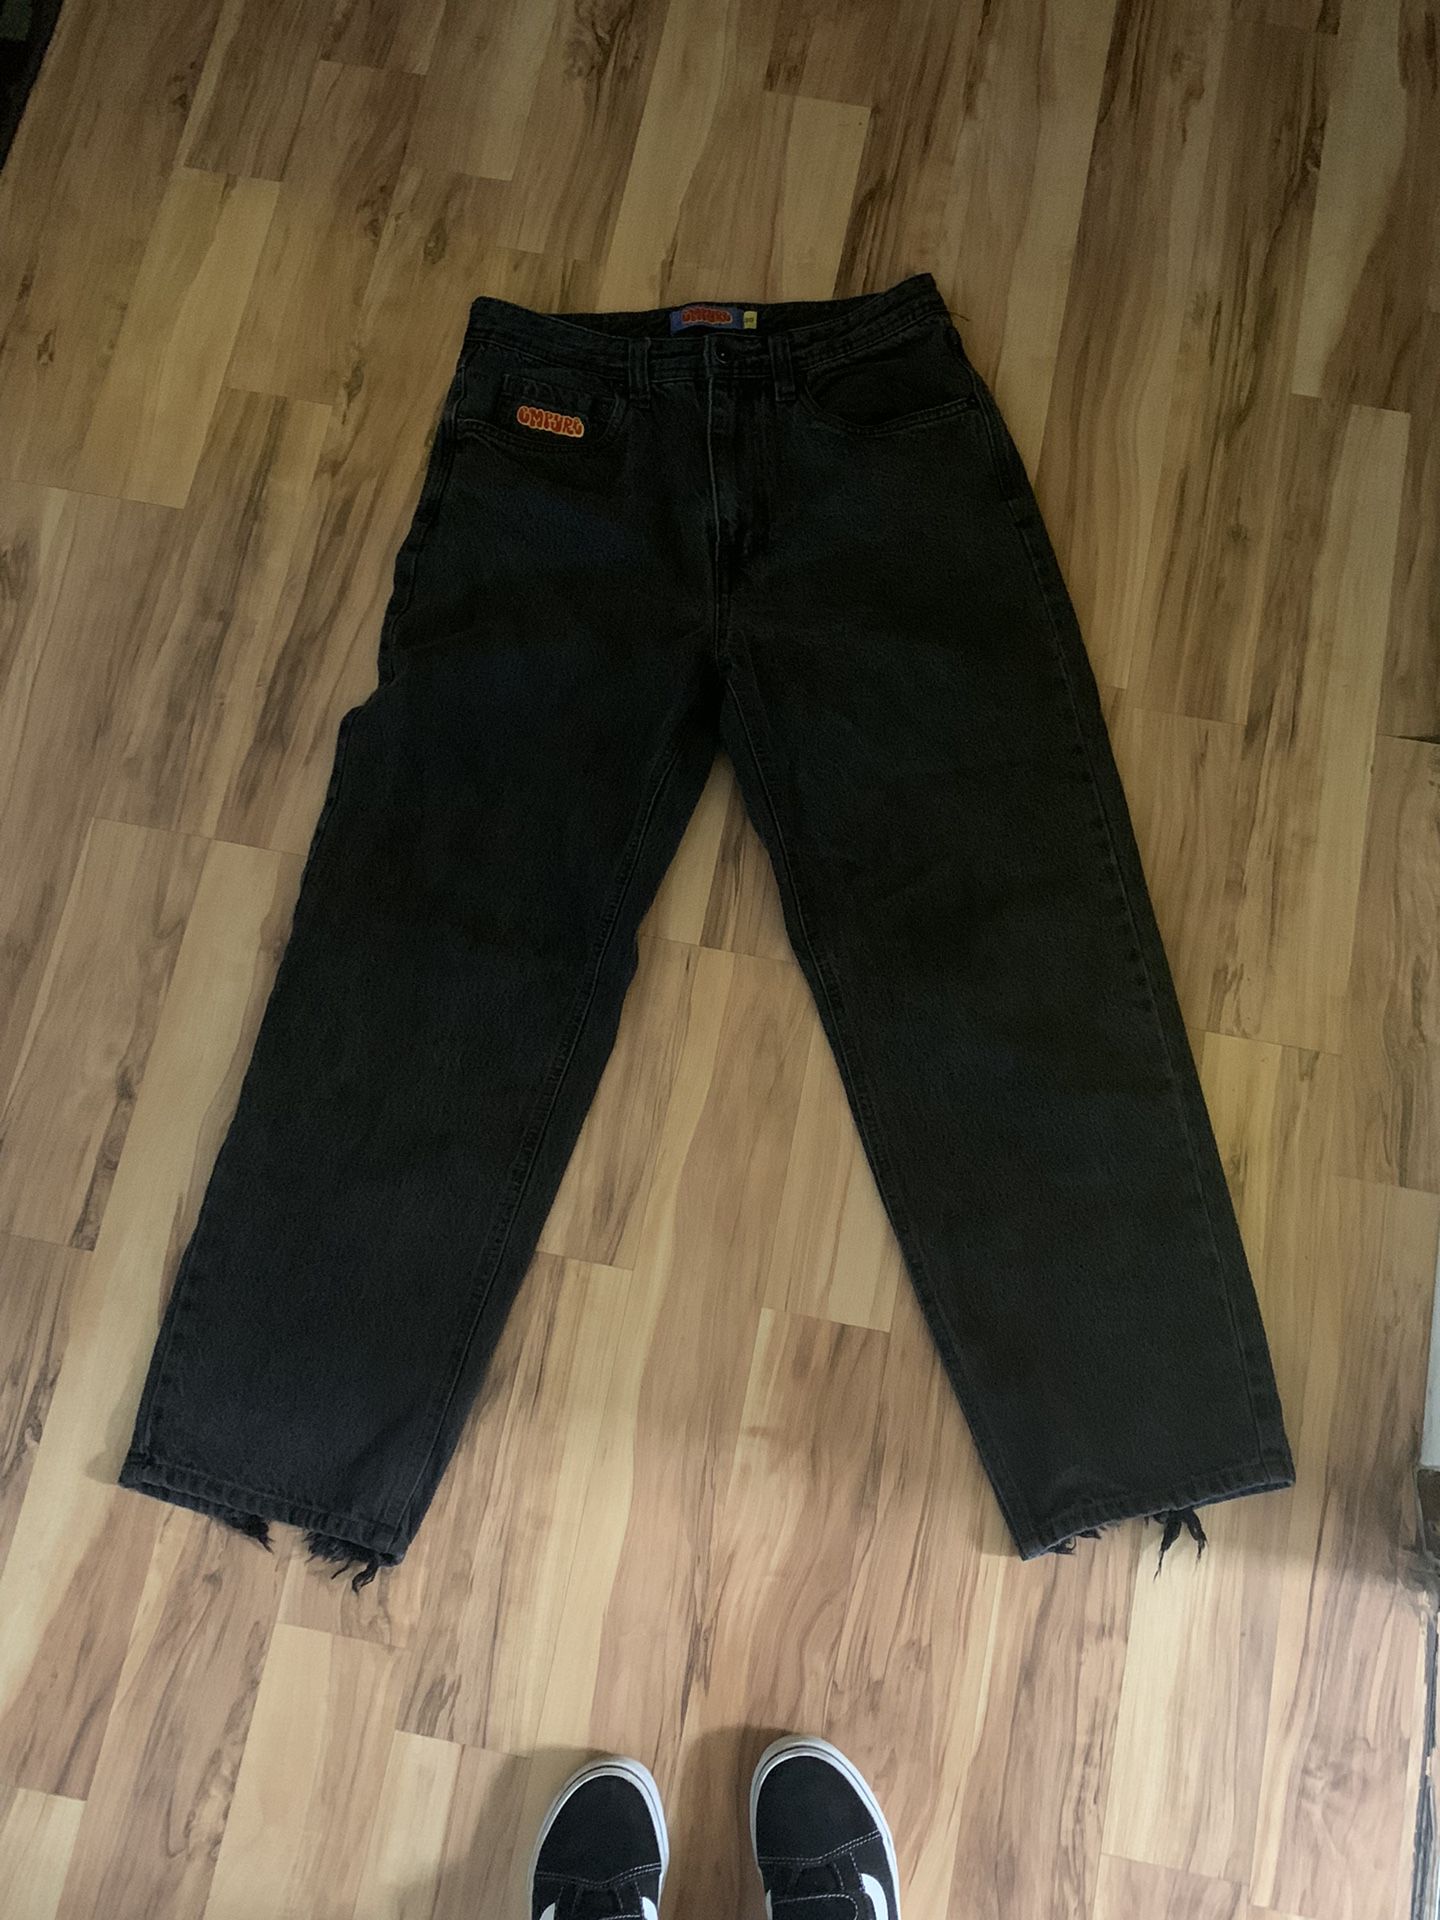 empyre jorts for Sale in Las Vegas, NV - OfferUp